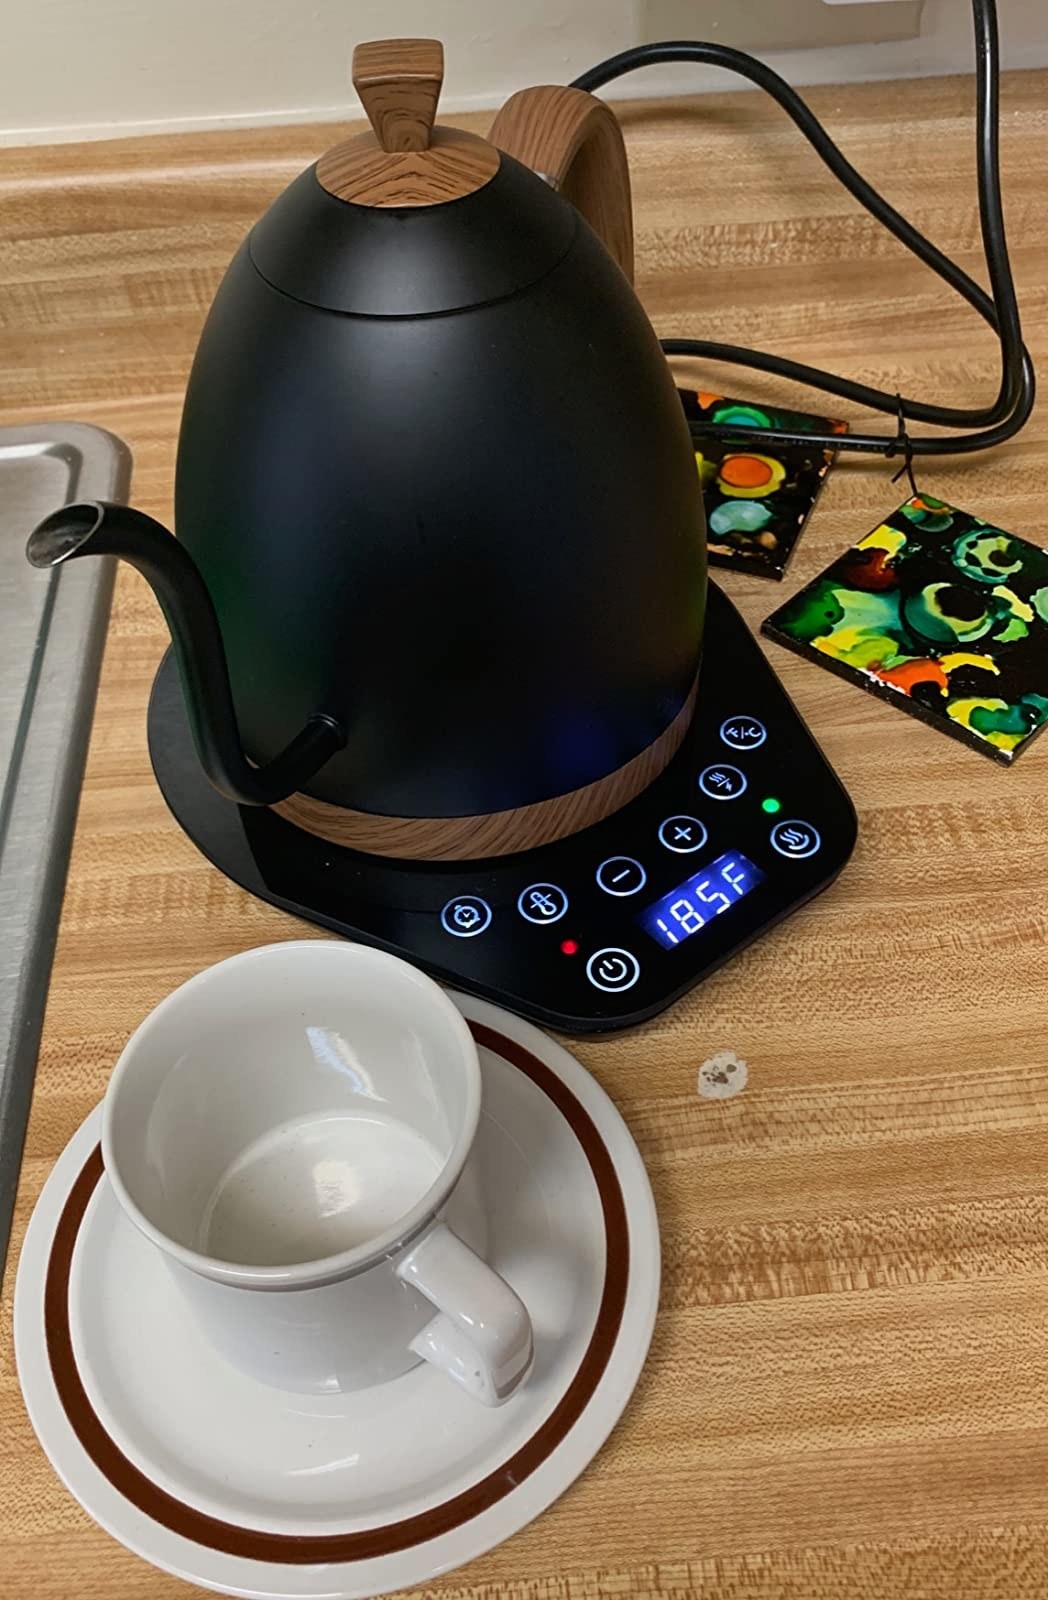 Black matte electric tea kettle on top of black panel with digital display of functions and temperature